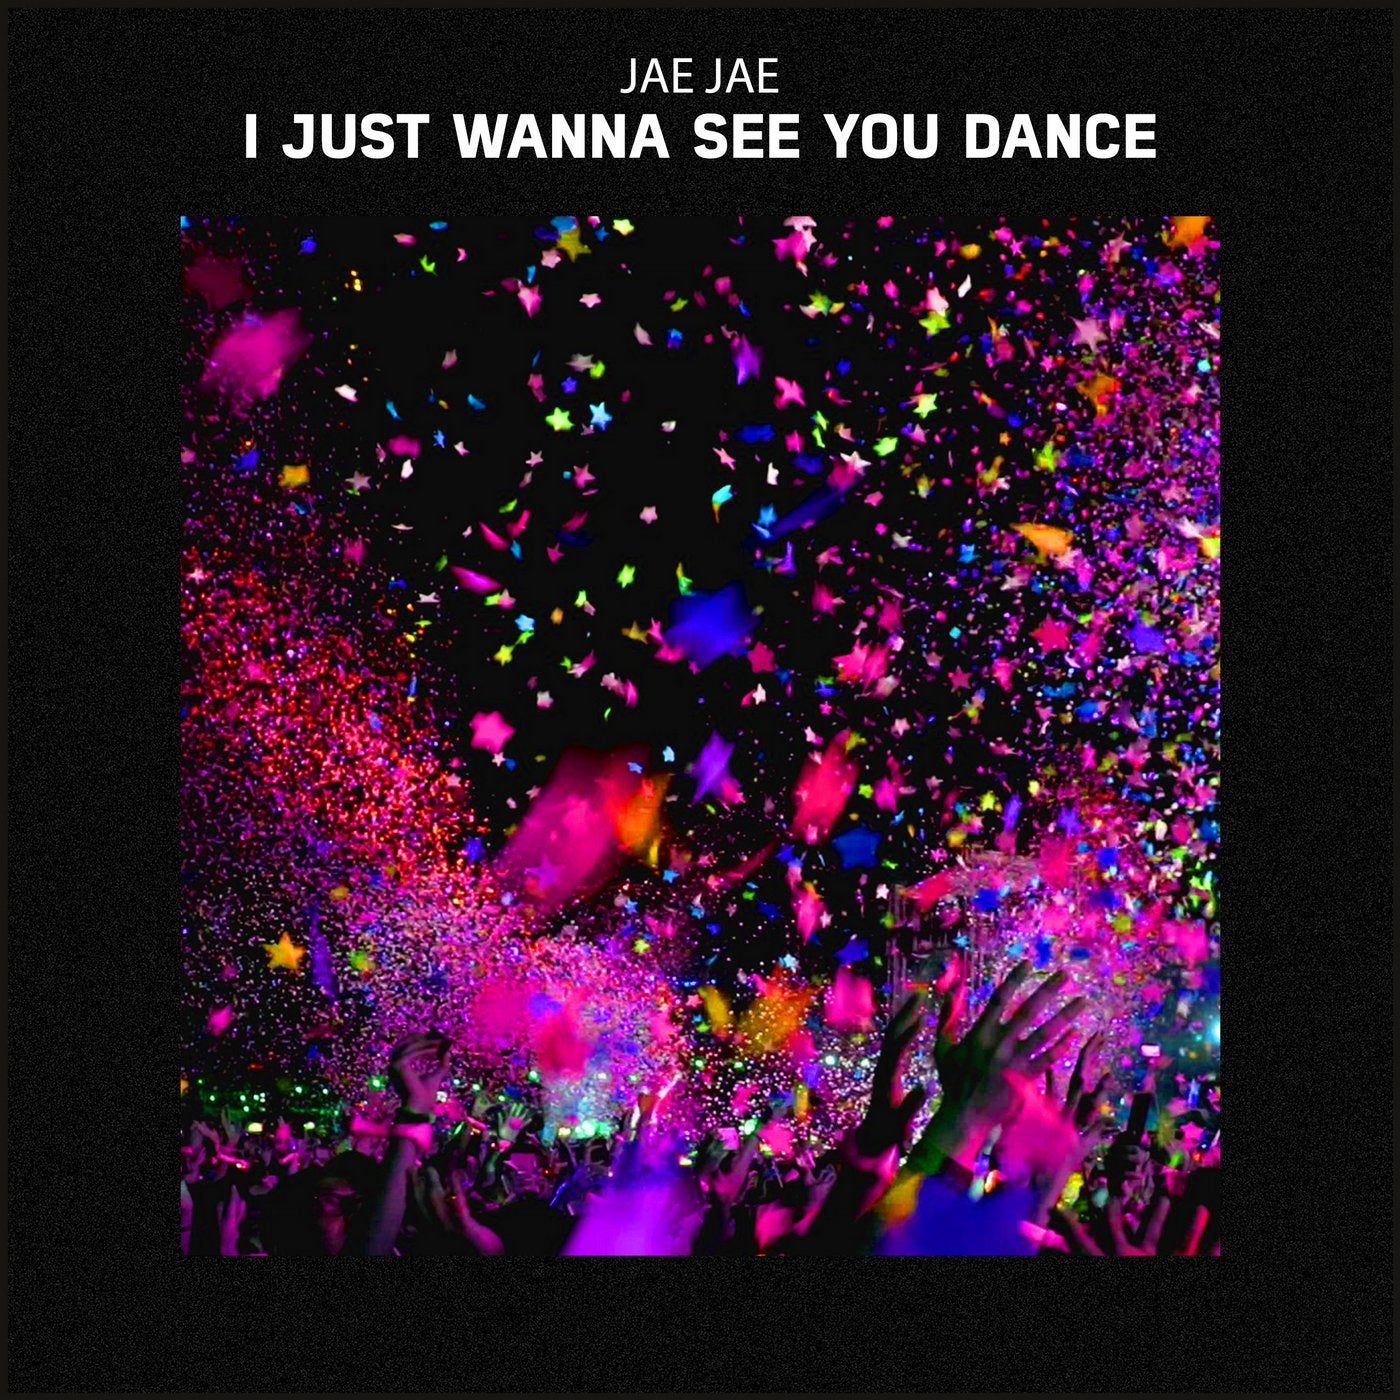 I Just Wanna See You Dance